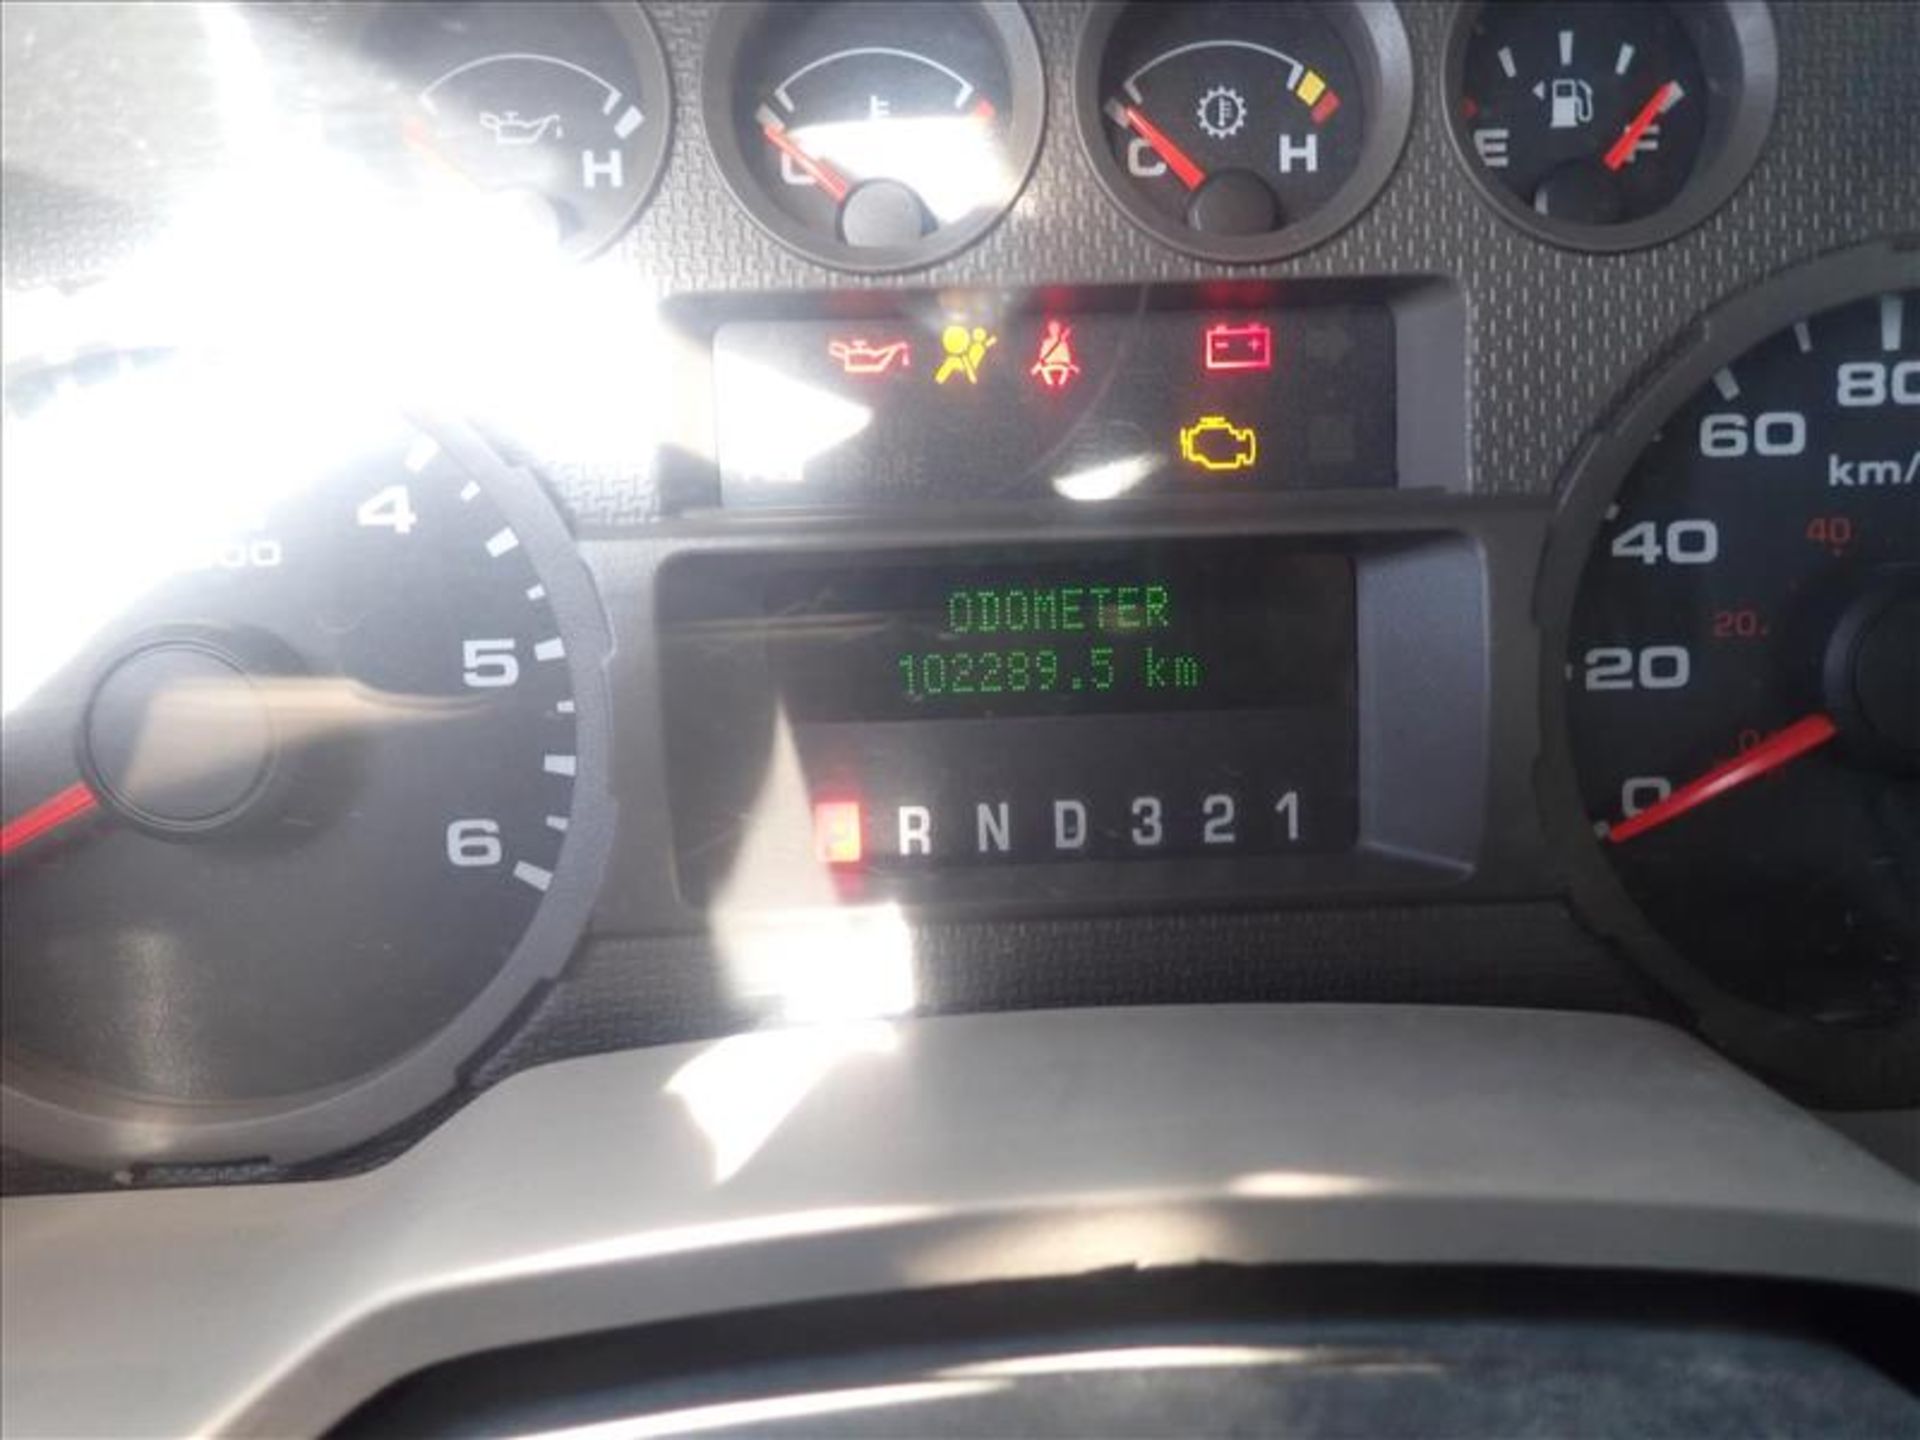 2008 Ford F250 XL SuperDuty pick-up truck, VIN 1FTSW21528EB74521, approx. 103000 km, crew-cab, - Image 7 of 9